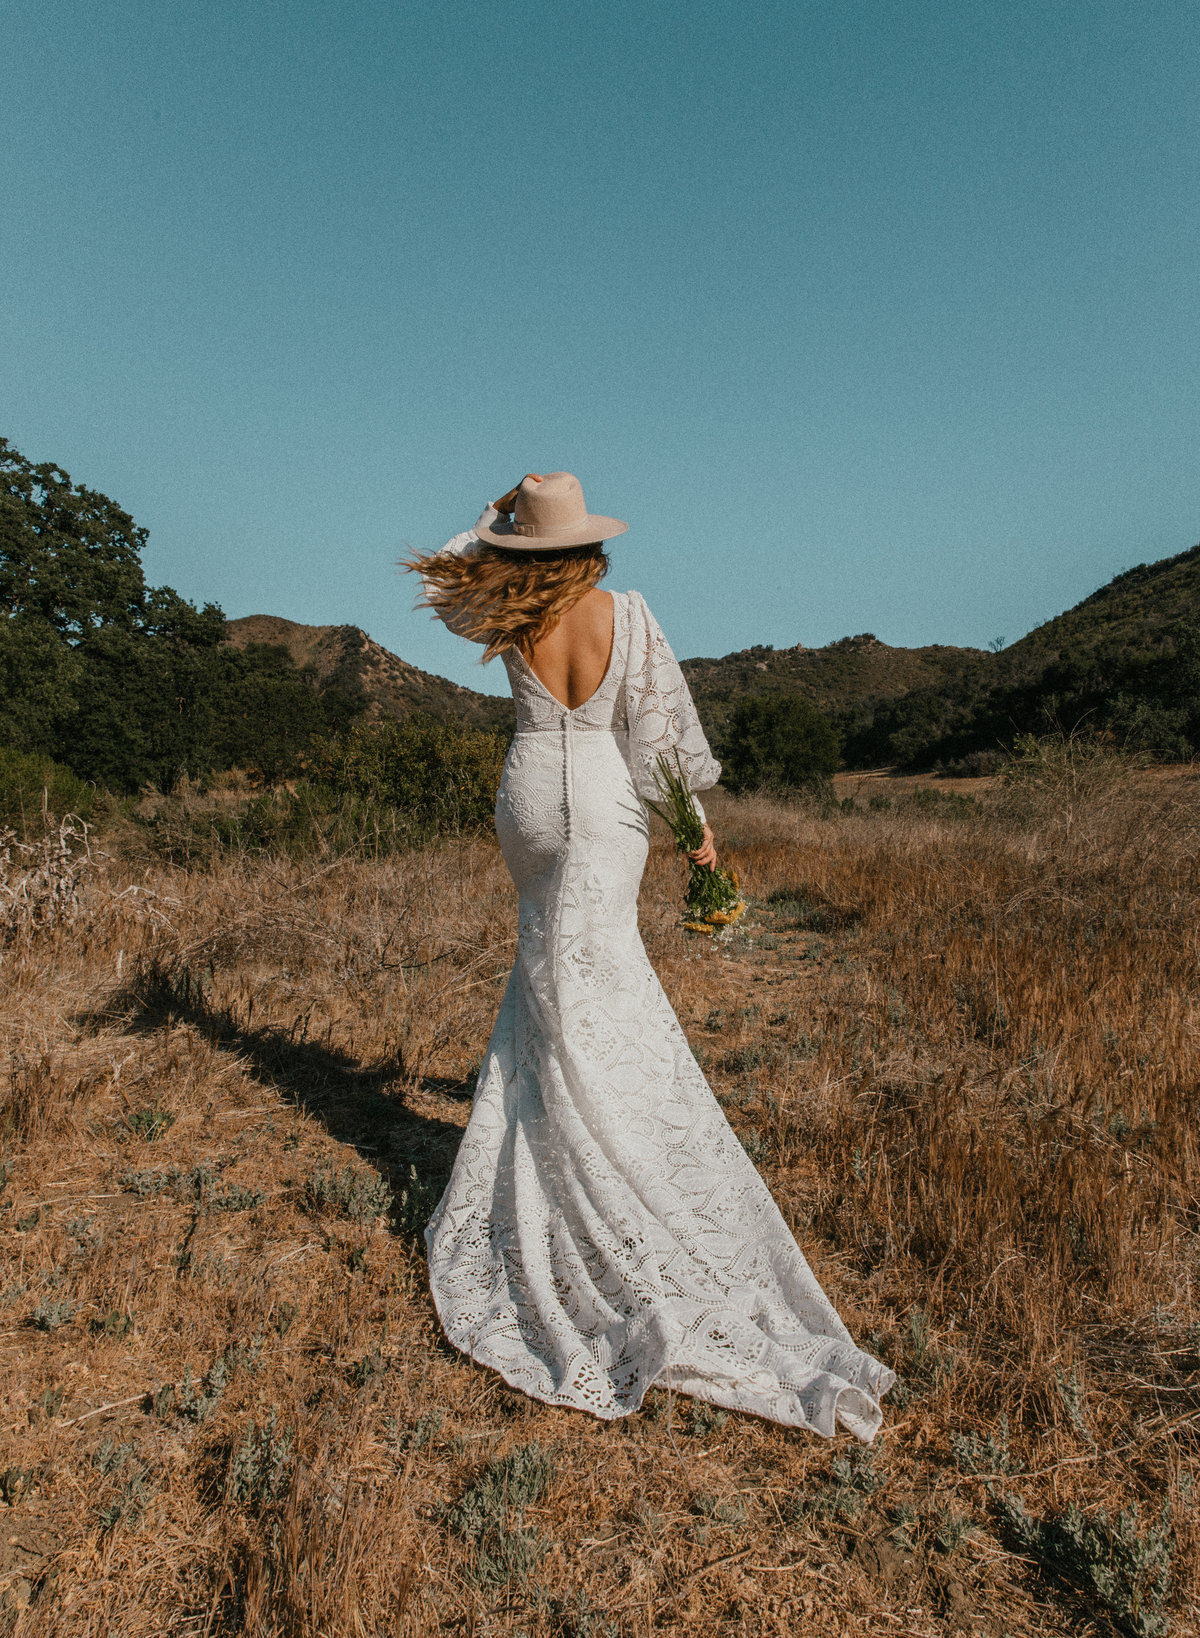 ong Sleeves Bohemian Wedding Dress by All Who Wander - Aston